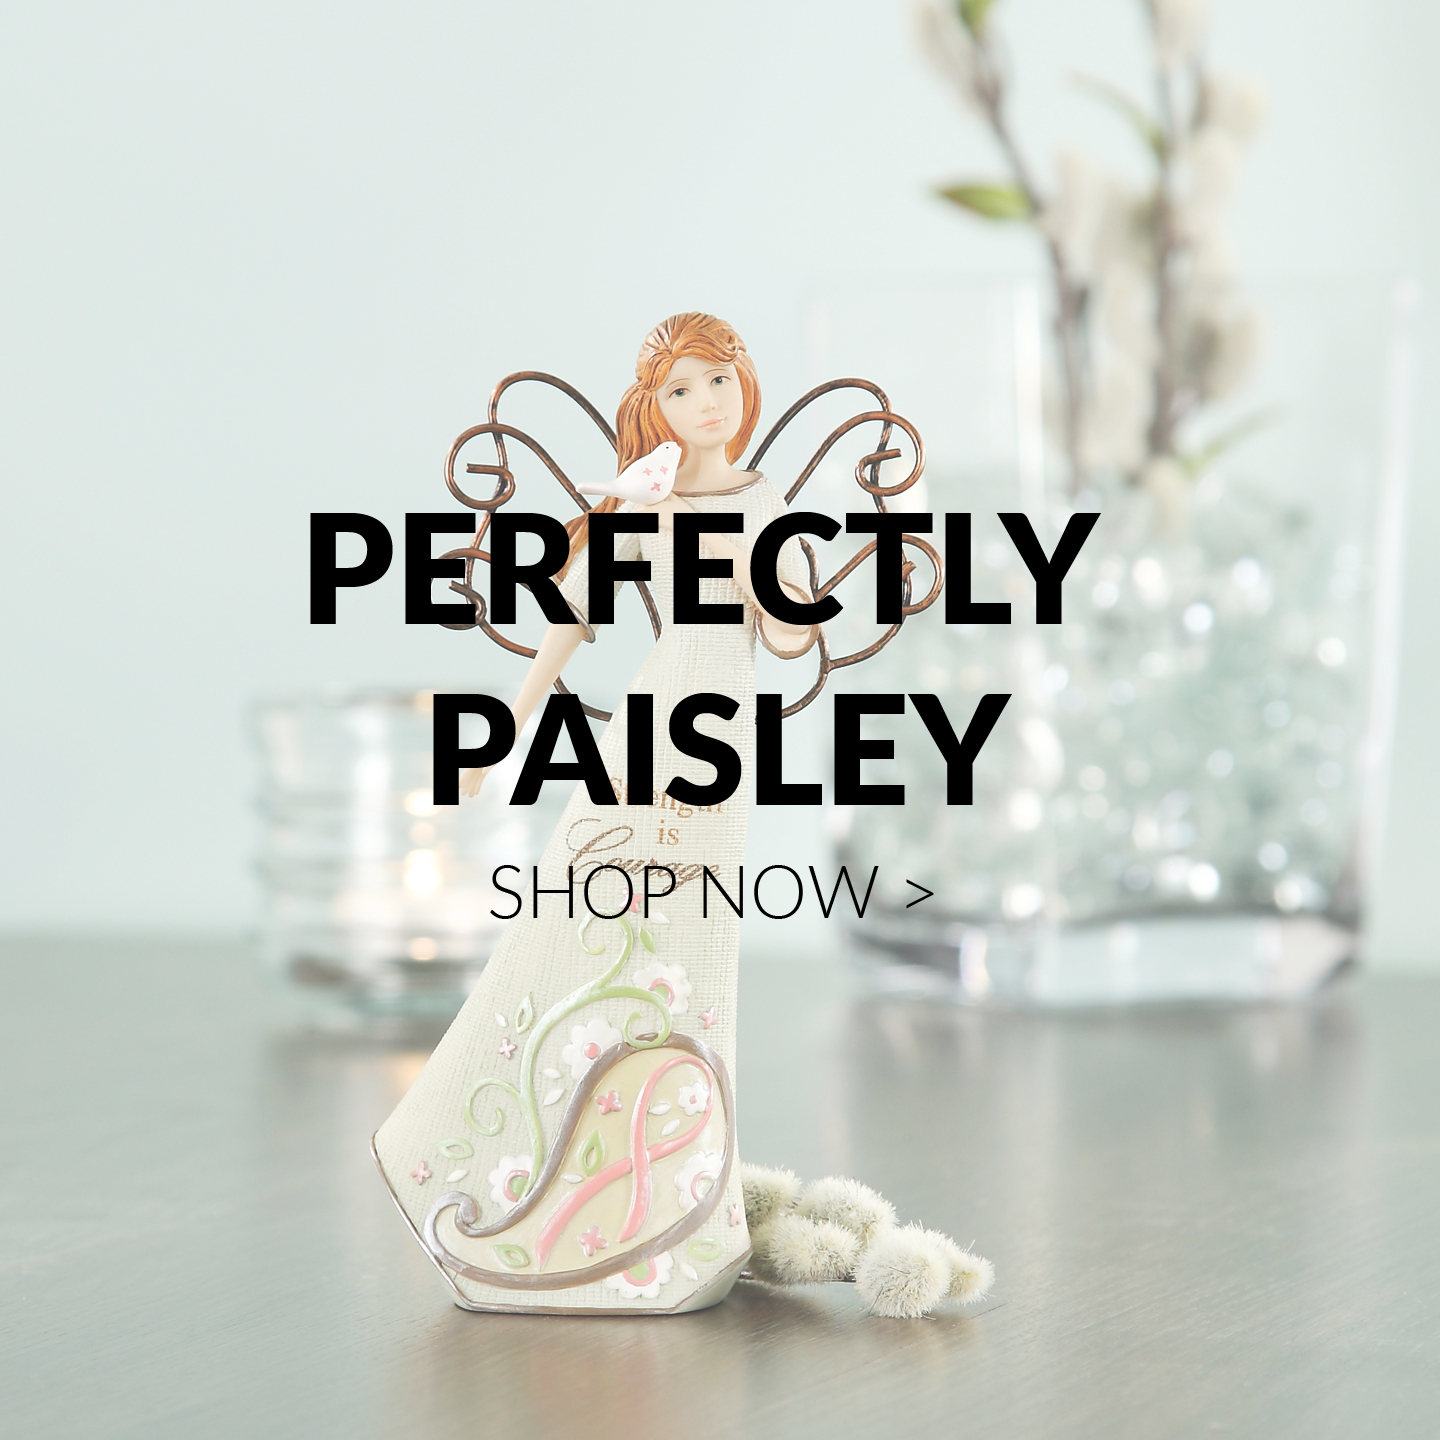 Perfectly Paisley